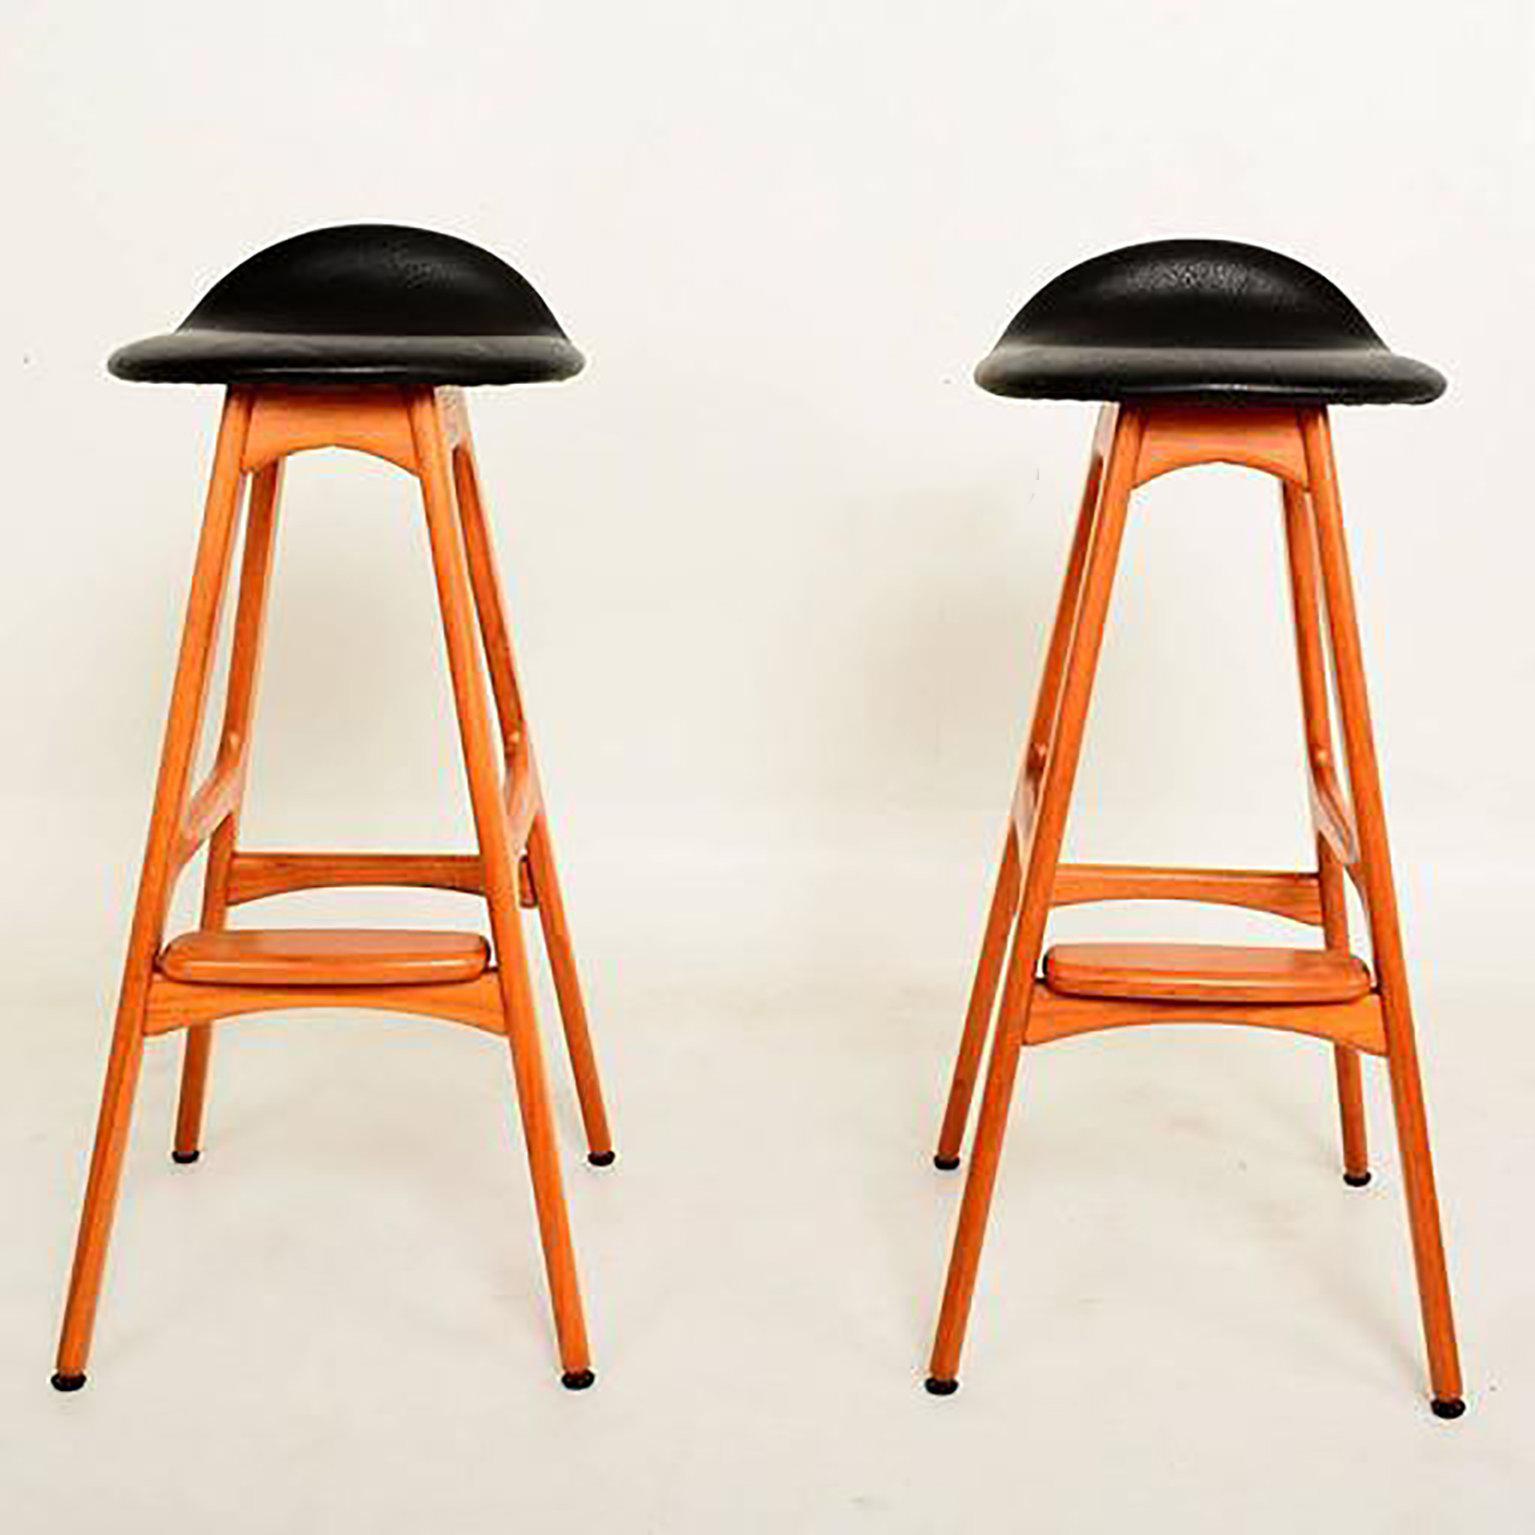 For your consideration a pair of Erik Buck bar stools made of teakwood with faux black leather.

No label present from the maker.

 